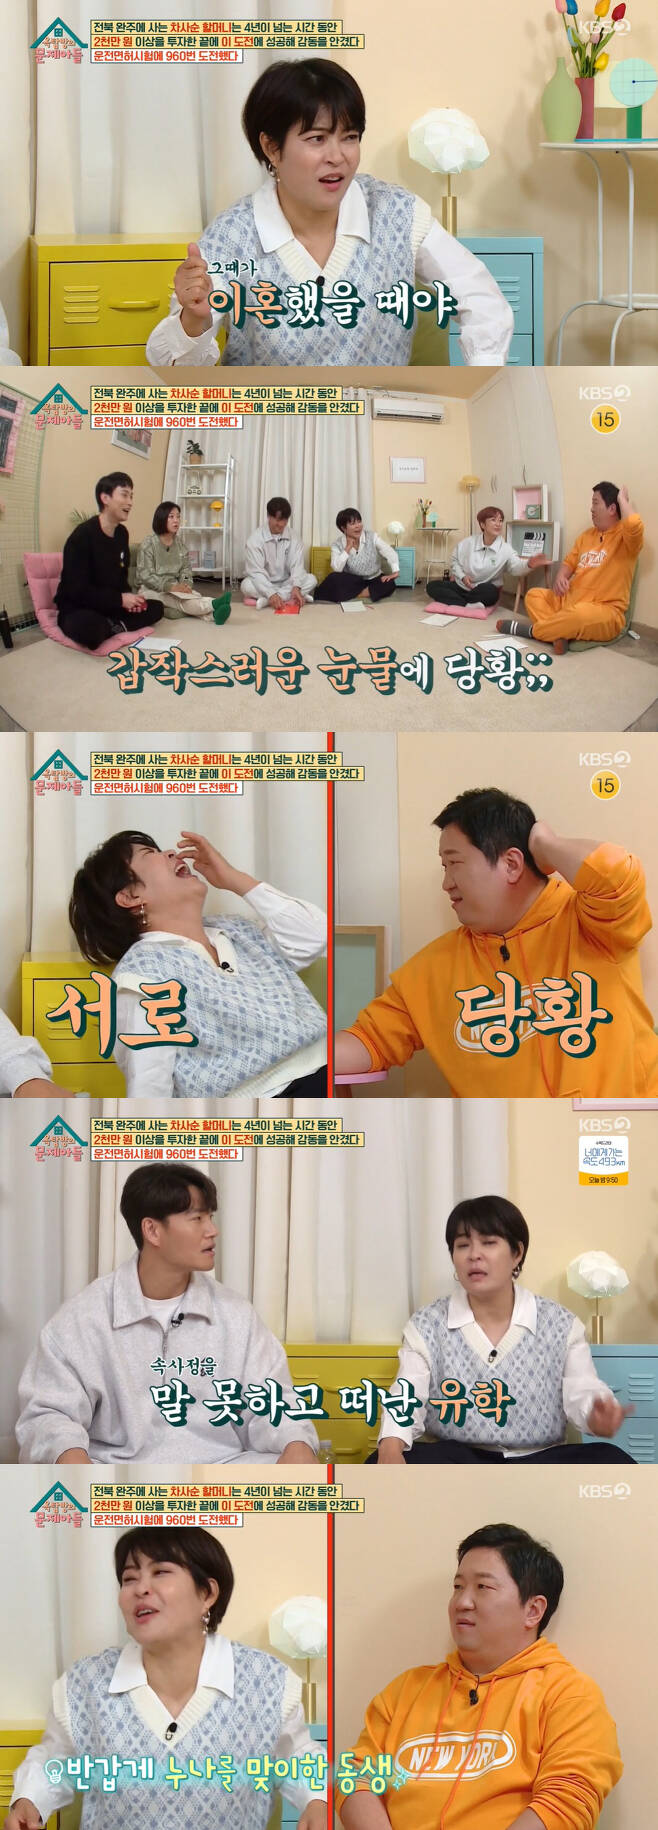 Gagwoman Jo Hye-ryun wept as she recalled Jeong Hyeong-don, leaving everyone baffled.Jo Hye-ryun appeared in the KBS2 entertainment program The Rooftops Problem Son broadcasted on the 11th.Jo Hye-ryun was shy of the MCs reaction to the eighth prime.Jo Hye-ryun, who recently made an exclusive contract with Lee Kyoung-kyus agency Angrydox and further accelerated his activities, said, I originally wanted to go to the office of (Song).I told him like a joke, I want to go too. He said, My sister is ah ~.Lee Kyoung-kyu, who has maintained a one-man system, said, I was so happy to suggest that we would like to come to our office? I signed a three-year contract and the conditions are satisfactory.He also gave me a down payment, he said, satisfied.Jo Hye-ryun recalled Gollums makeup, which collected the topic of Changan, recounting his past prime.Jo Hye-ryun said, I see you dressed up ... the person who dressed up did his best.I went to the bathroom and tried to face my face, but I could not see it. The topic of conversation over this issue has returned to Lee Kyong-kyu.Joe Hye-ryun said, I have been talking about it without knowing it when I asked Lee Kyoung-kyu about the occasion.Jo Hye-ryun said he would like to introduce gag woman Kim Seung-hye to Kim Jong-kook. He is a real Wanned simple.I said I would present clothes if I scored a goal, and I really scored a goal. So Song Eun-yi said,  (God) Bongseon also likes (Kim) Jongguk very much.Bongseon is also a Woven simple, you should be wearing a coat at home, laughed Kim Jong-kook, who said, Id rather have a long-time Bongseon.I will see you soon, he said, leaving a video letter to make a pink mood.Jo Hye-ryun has also revealed her pink remarriage with Husband, a younger two-year-old.There were times when I was worried about how to tell my children about their friendship, but the situation was improved because the children also tried to get close to Husband.Jo Hye-ryun said, The children called me Uncle, but I decided to say Father, and one day I wrote I will call him Father all over the house.Husband was impressed, he recalled, as well as being impressed by introducing others as Father.Also, his son, Space, sent a letter from the army, saying, When I came here, I realized that Father was so good.I am so grateful for the hard process such as quitting school and giving love counseling, and I am good because I am my father. Jo Hye-ryun also explained that Husband and his nickname for each other are baby.Jing Hyeong-don released an episode in the past that Jo Hye-ryun called him in regards when he left China study abroad; he told him I thought of you.Jo Hye-ryun said, I actually liked my brother-in-law. I did not like him as a man.When I was in a divorce, I thought of you when I was alone. So Song Eun-yi said, Divorce and why ... and laughed, When did you have it in your heart?When Jing Hyong-don said, I married in 2009 and when was it? Jo Hye-ryun said, When you married, I did not give a divorce.So its not that, he explained, adding a smile.Song Eun-yi said, I know that I went to study abroad because I had difficulty in conjecturing after divorce. Jo Hye-ryun said, It was an office like Jeong Hyeong-don.I met him at another recording site in a long time, but he was upset. 